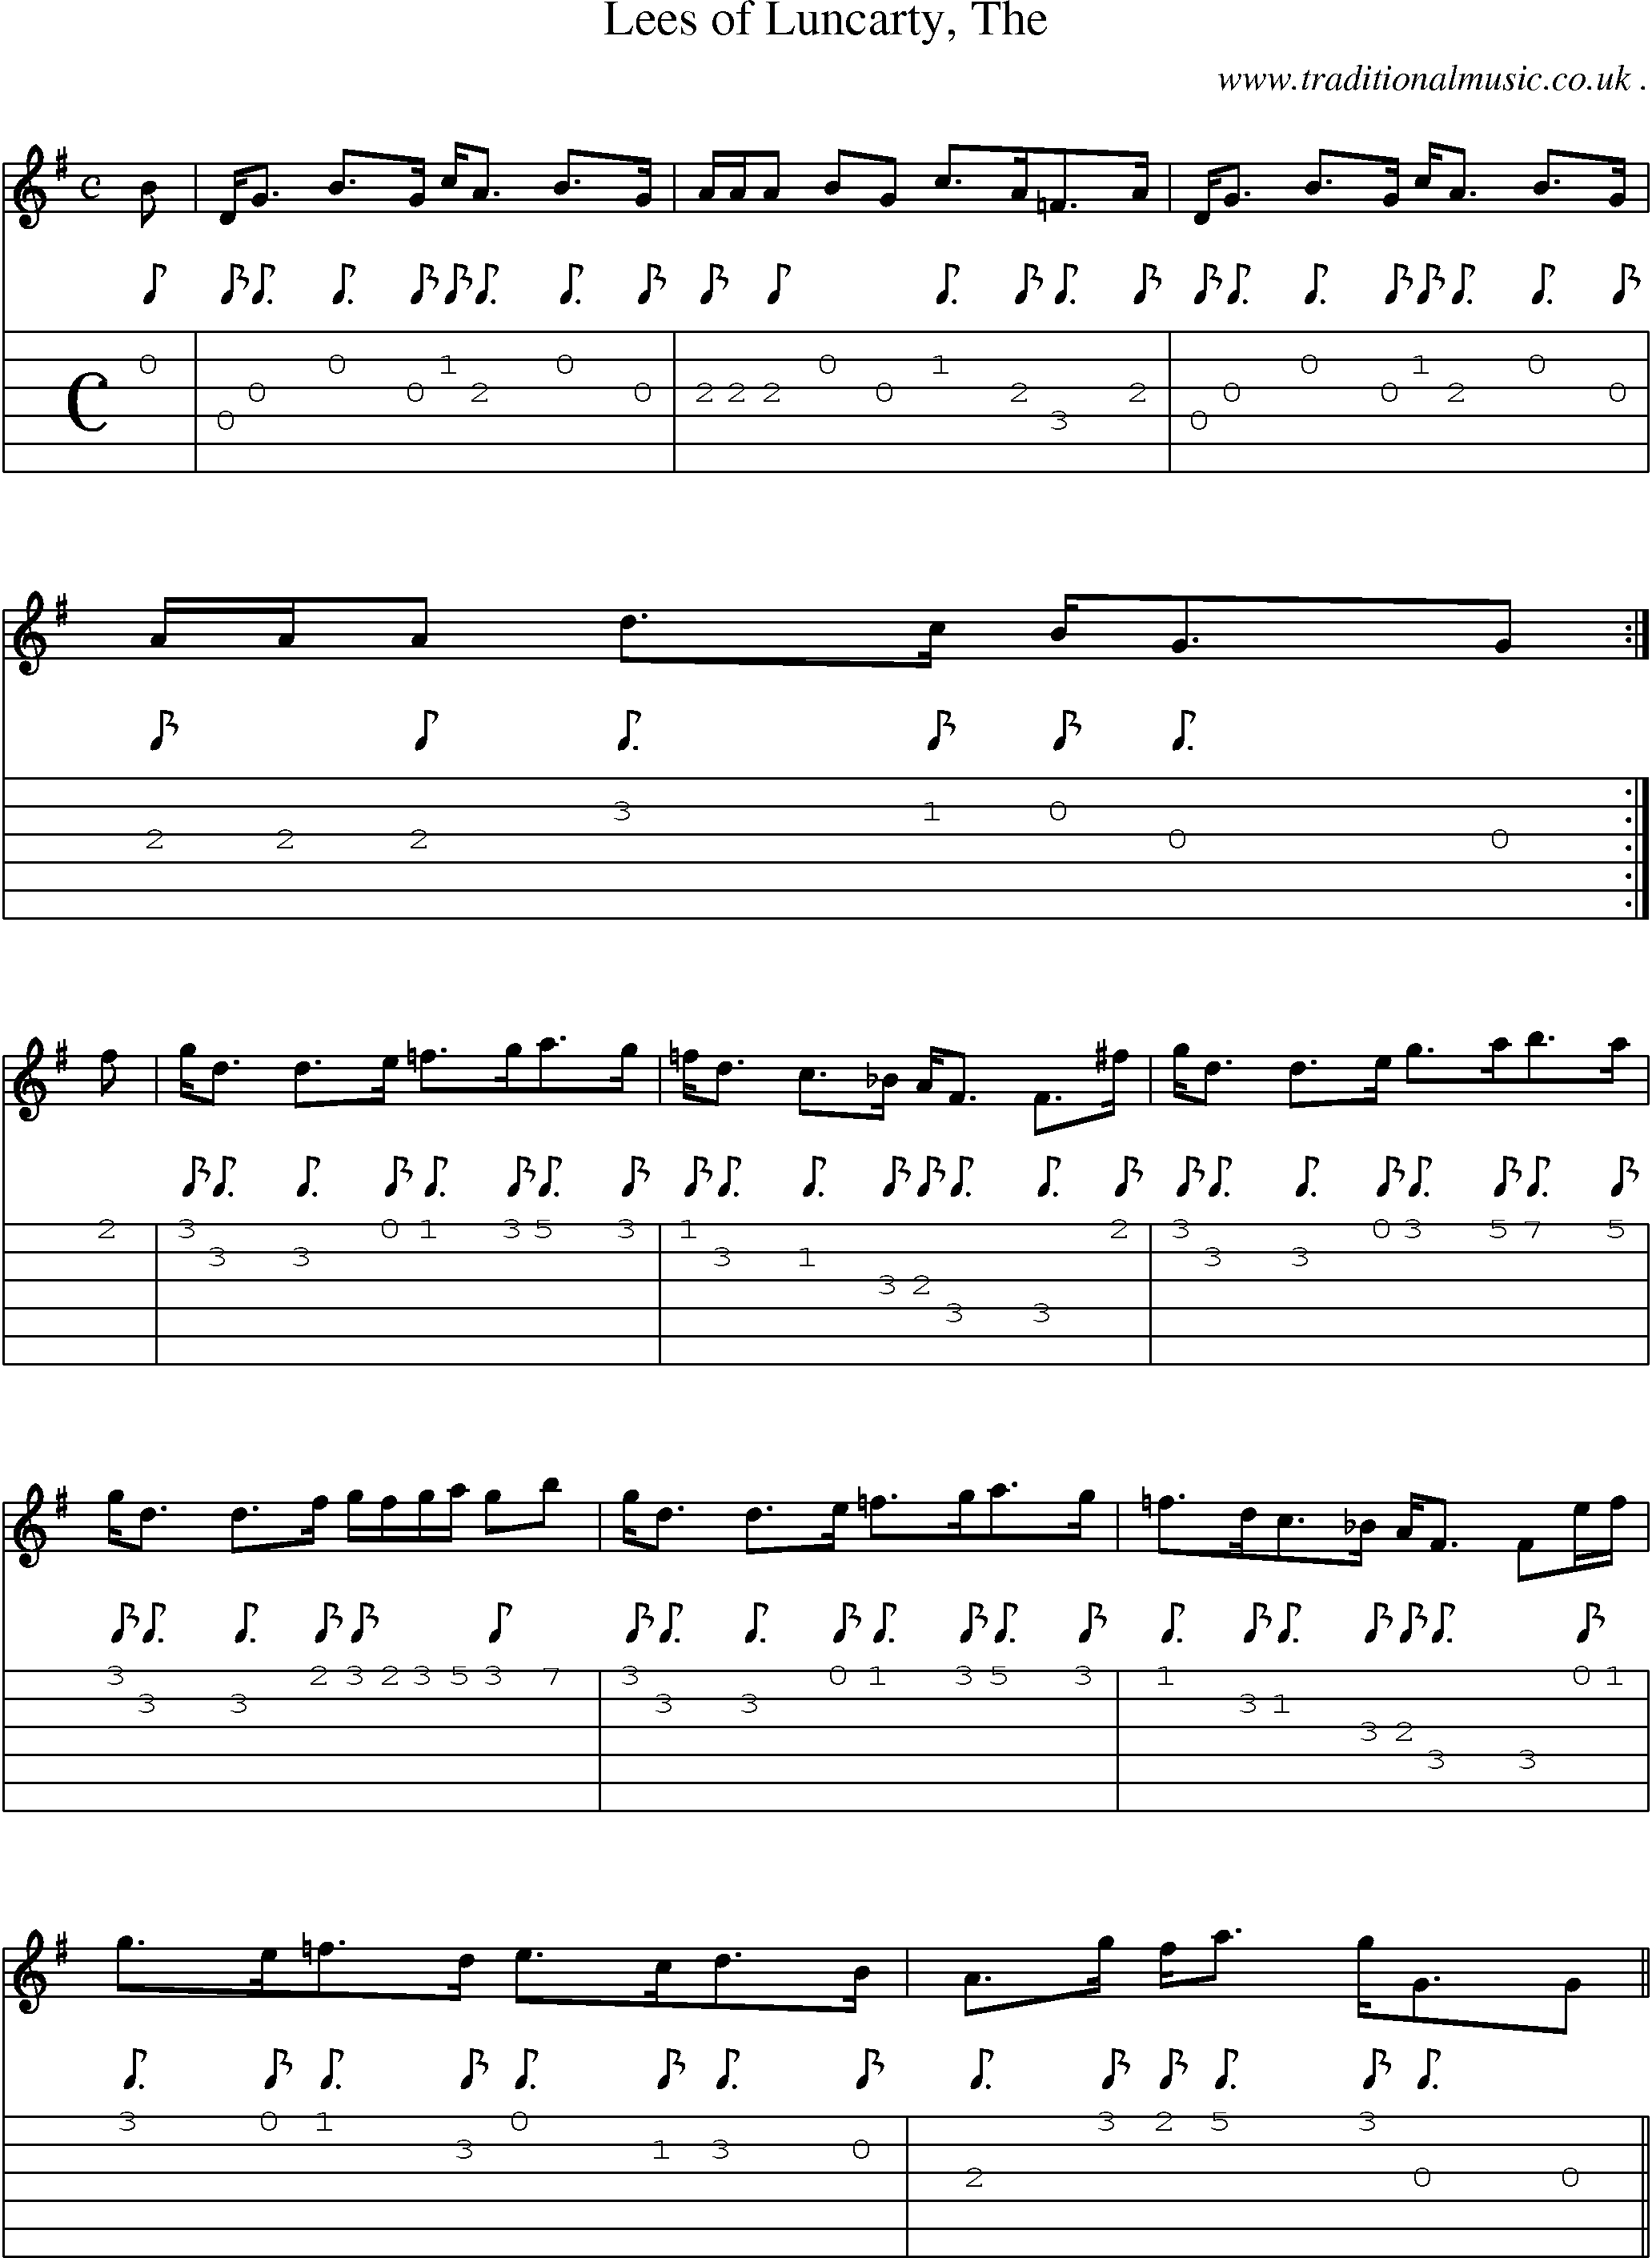 Sheet-music  score, Chords and Guitar Tabs for Lees Of Luncarty The